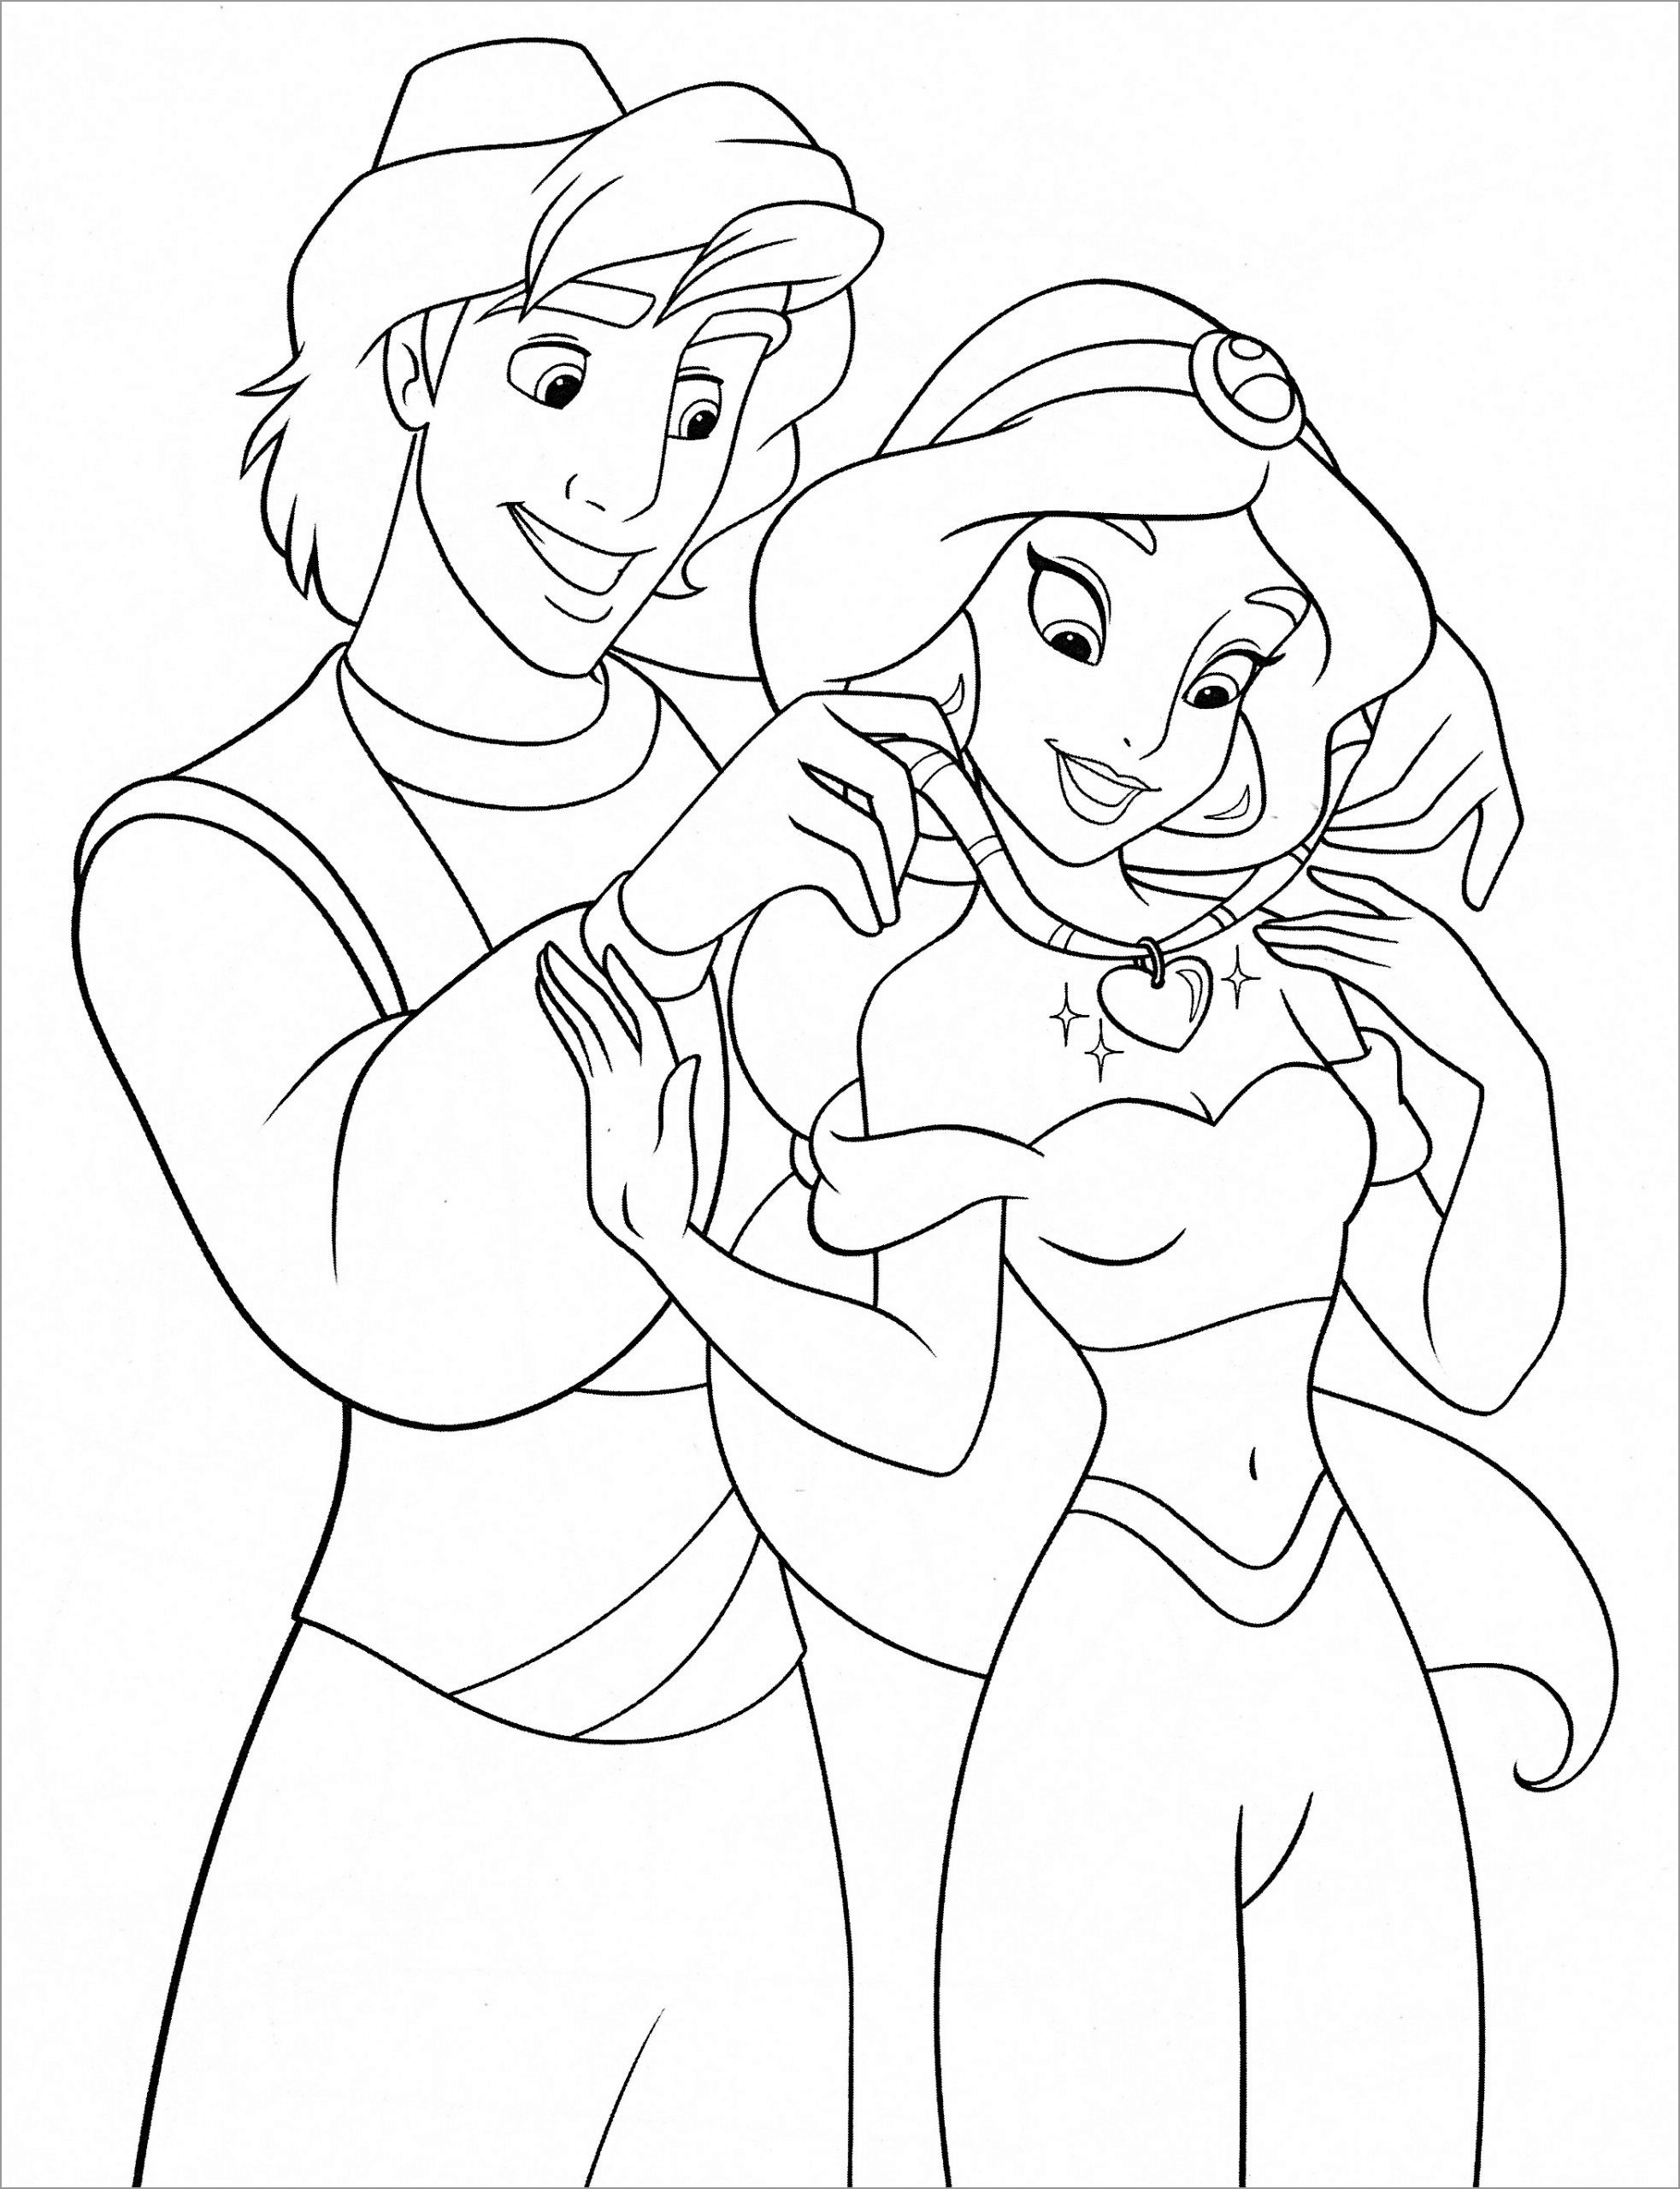 Aladdin and Jasmine Coloring Page for Kids